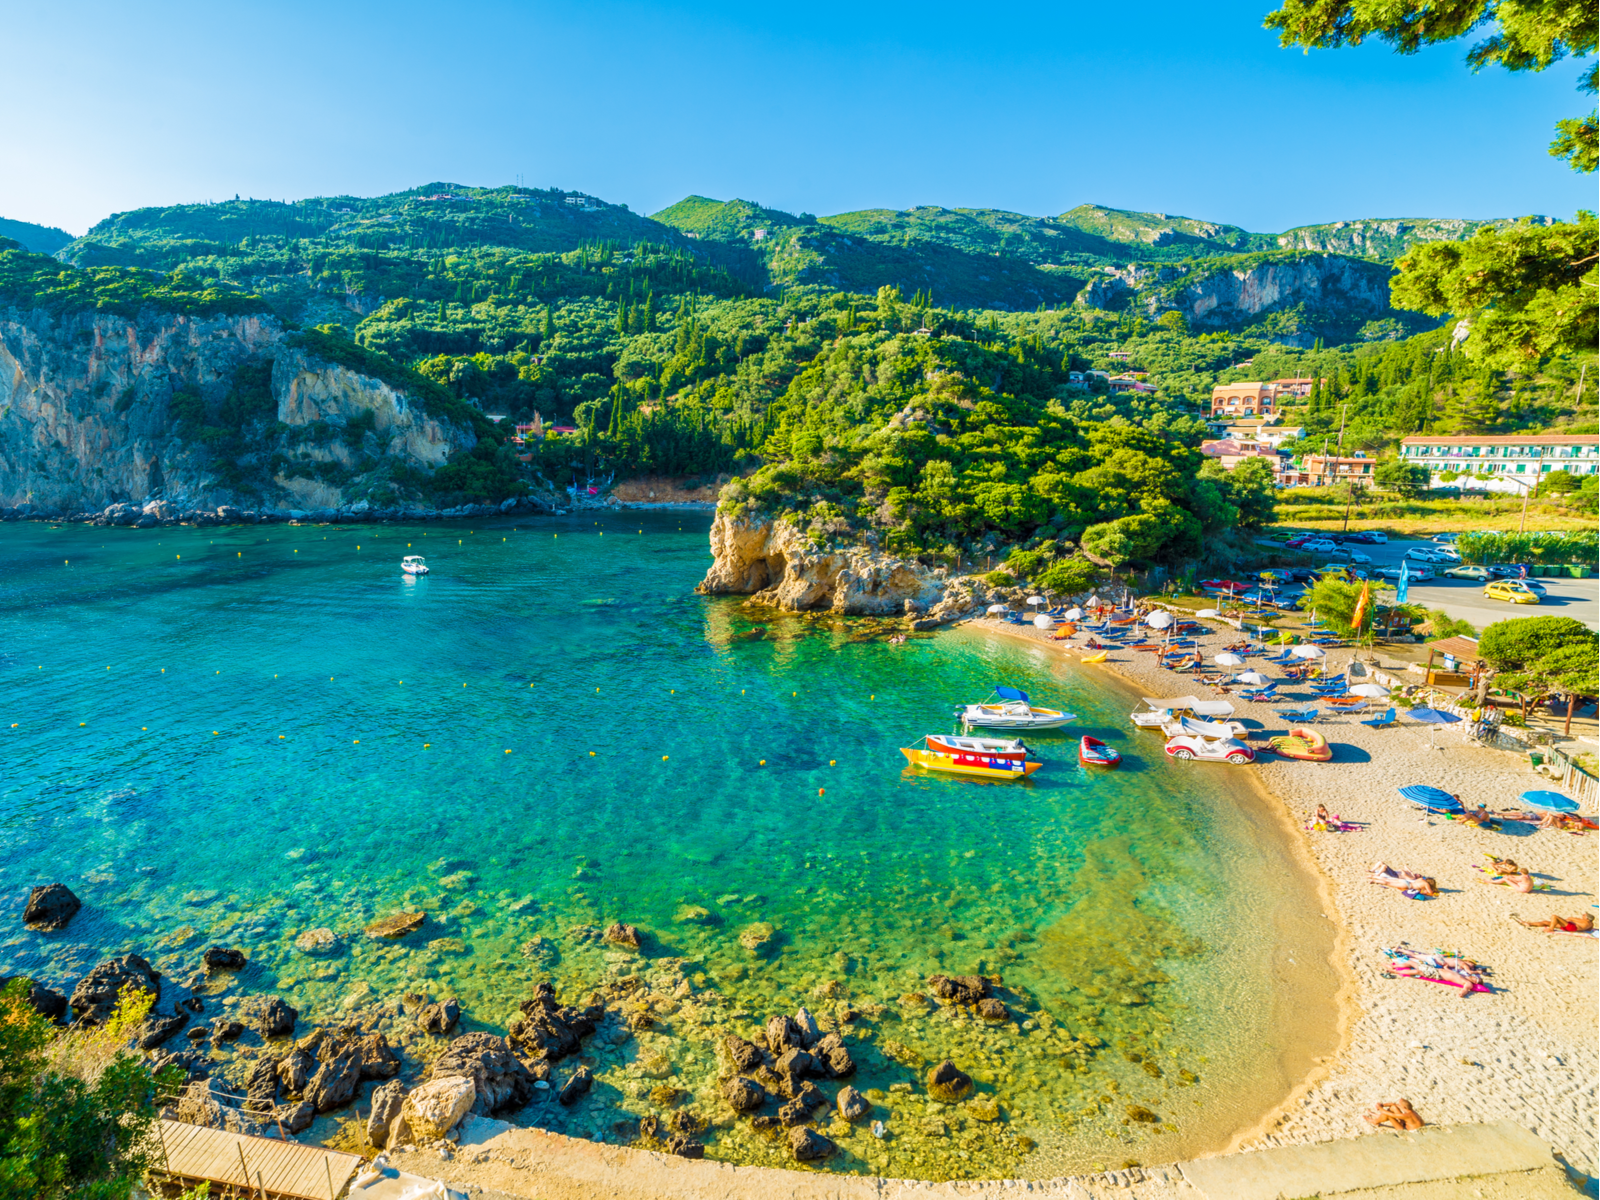 Tourists sunbathing on a beautiful beach during a summer at Corfu Island, a piece on the best places to visit in Greece, and small boats idling on the calm emerald waters